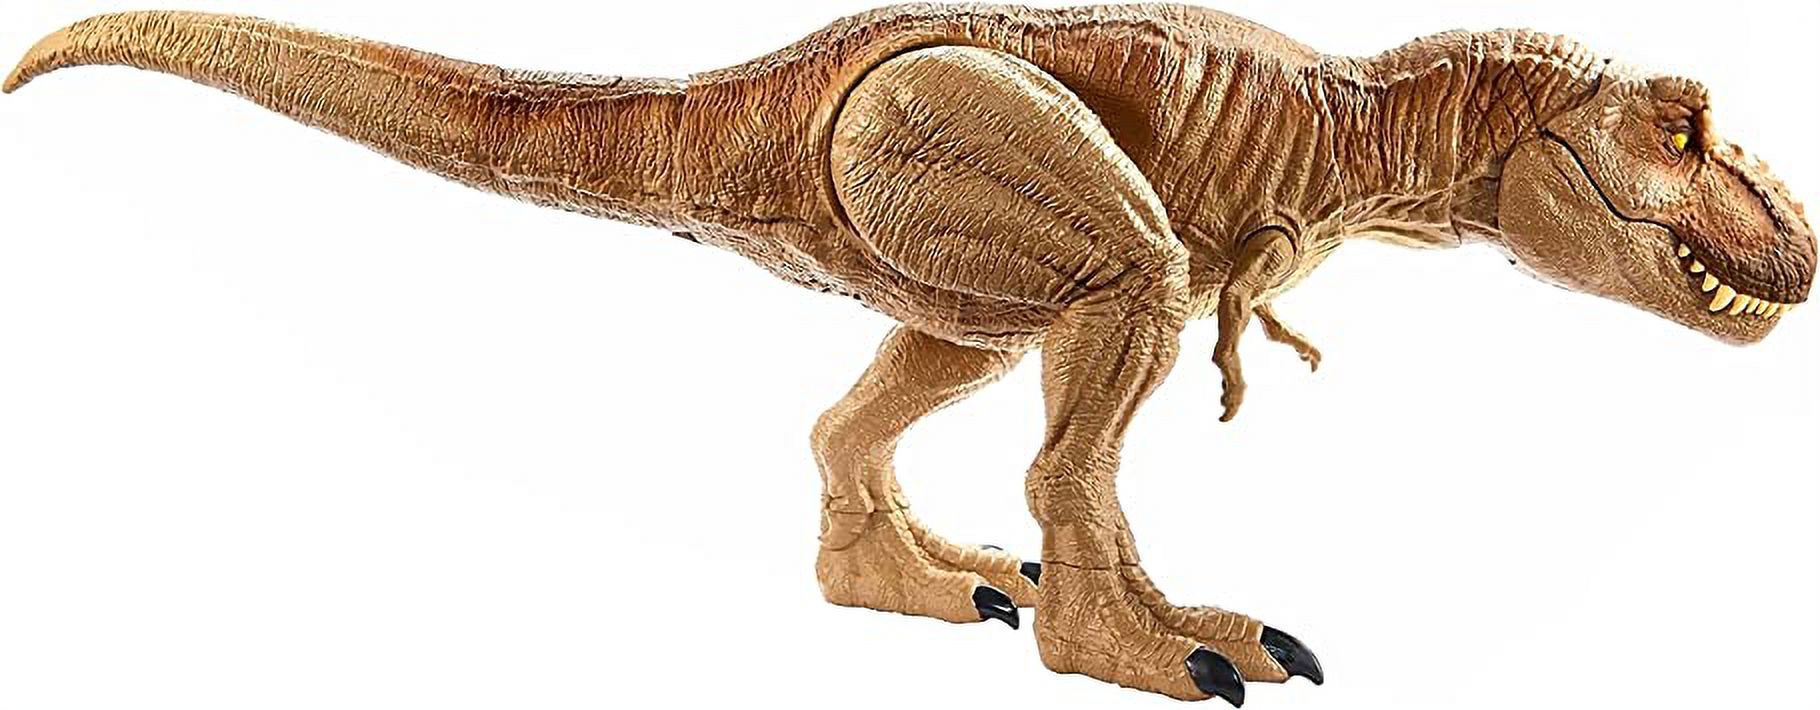 Jurassic World Camp Cretaceous Epic Roarin��� Tyrannosaurus Rex Large Action Figure, Primal Attack Feature, Sound, Realistic Shaking, Movable Joints; Ages 4 Years & Up - image 1 of 8